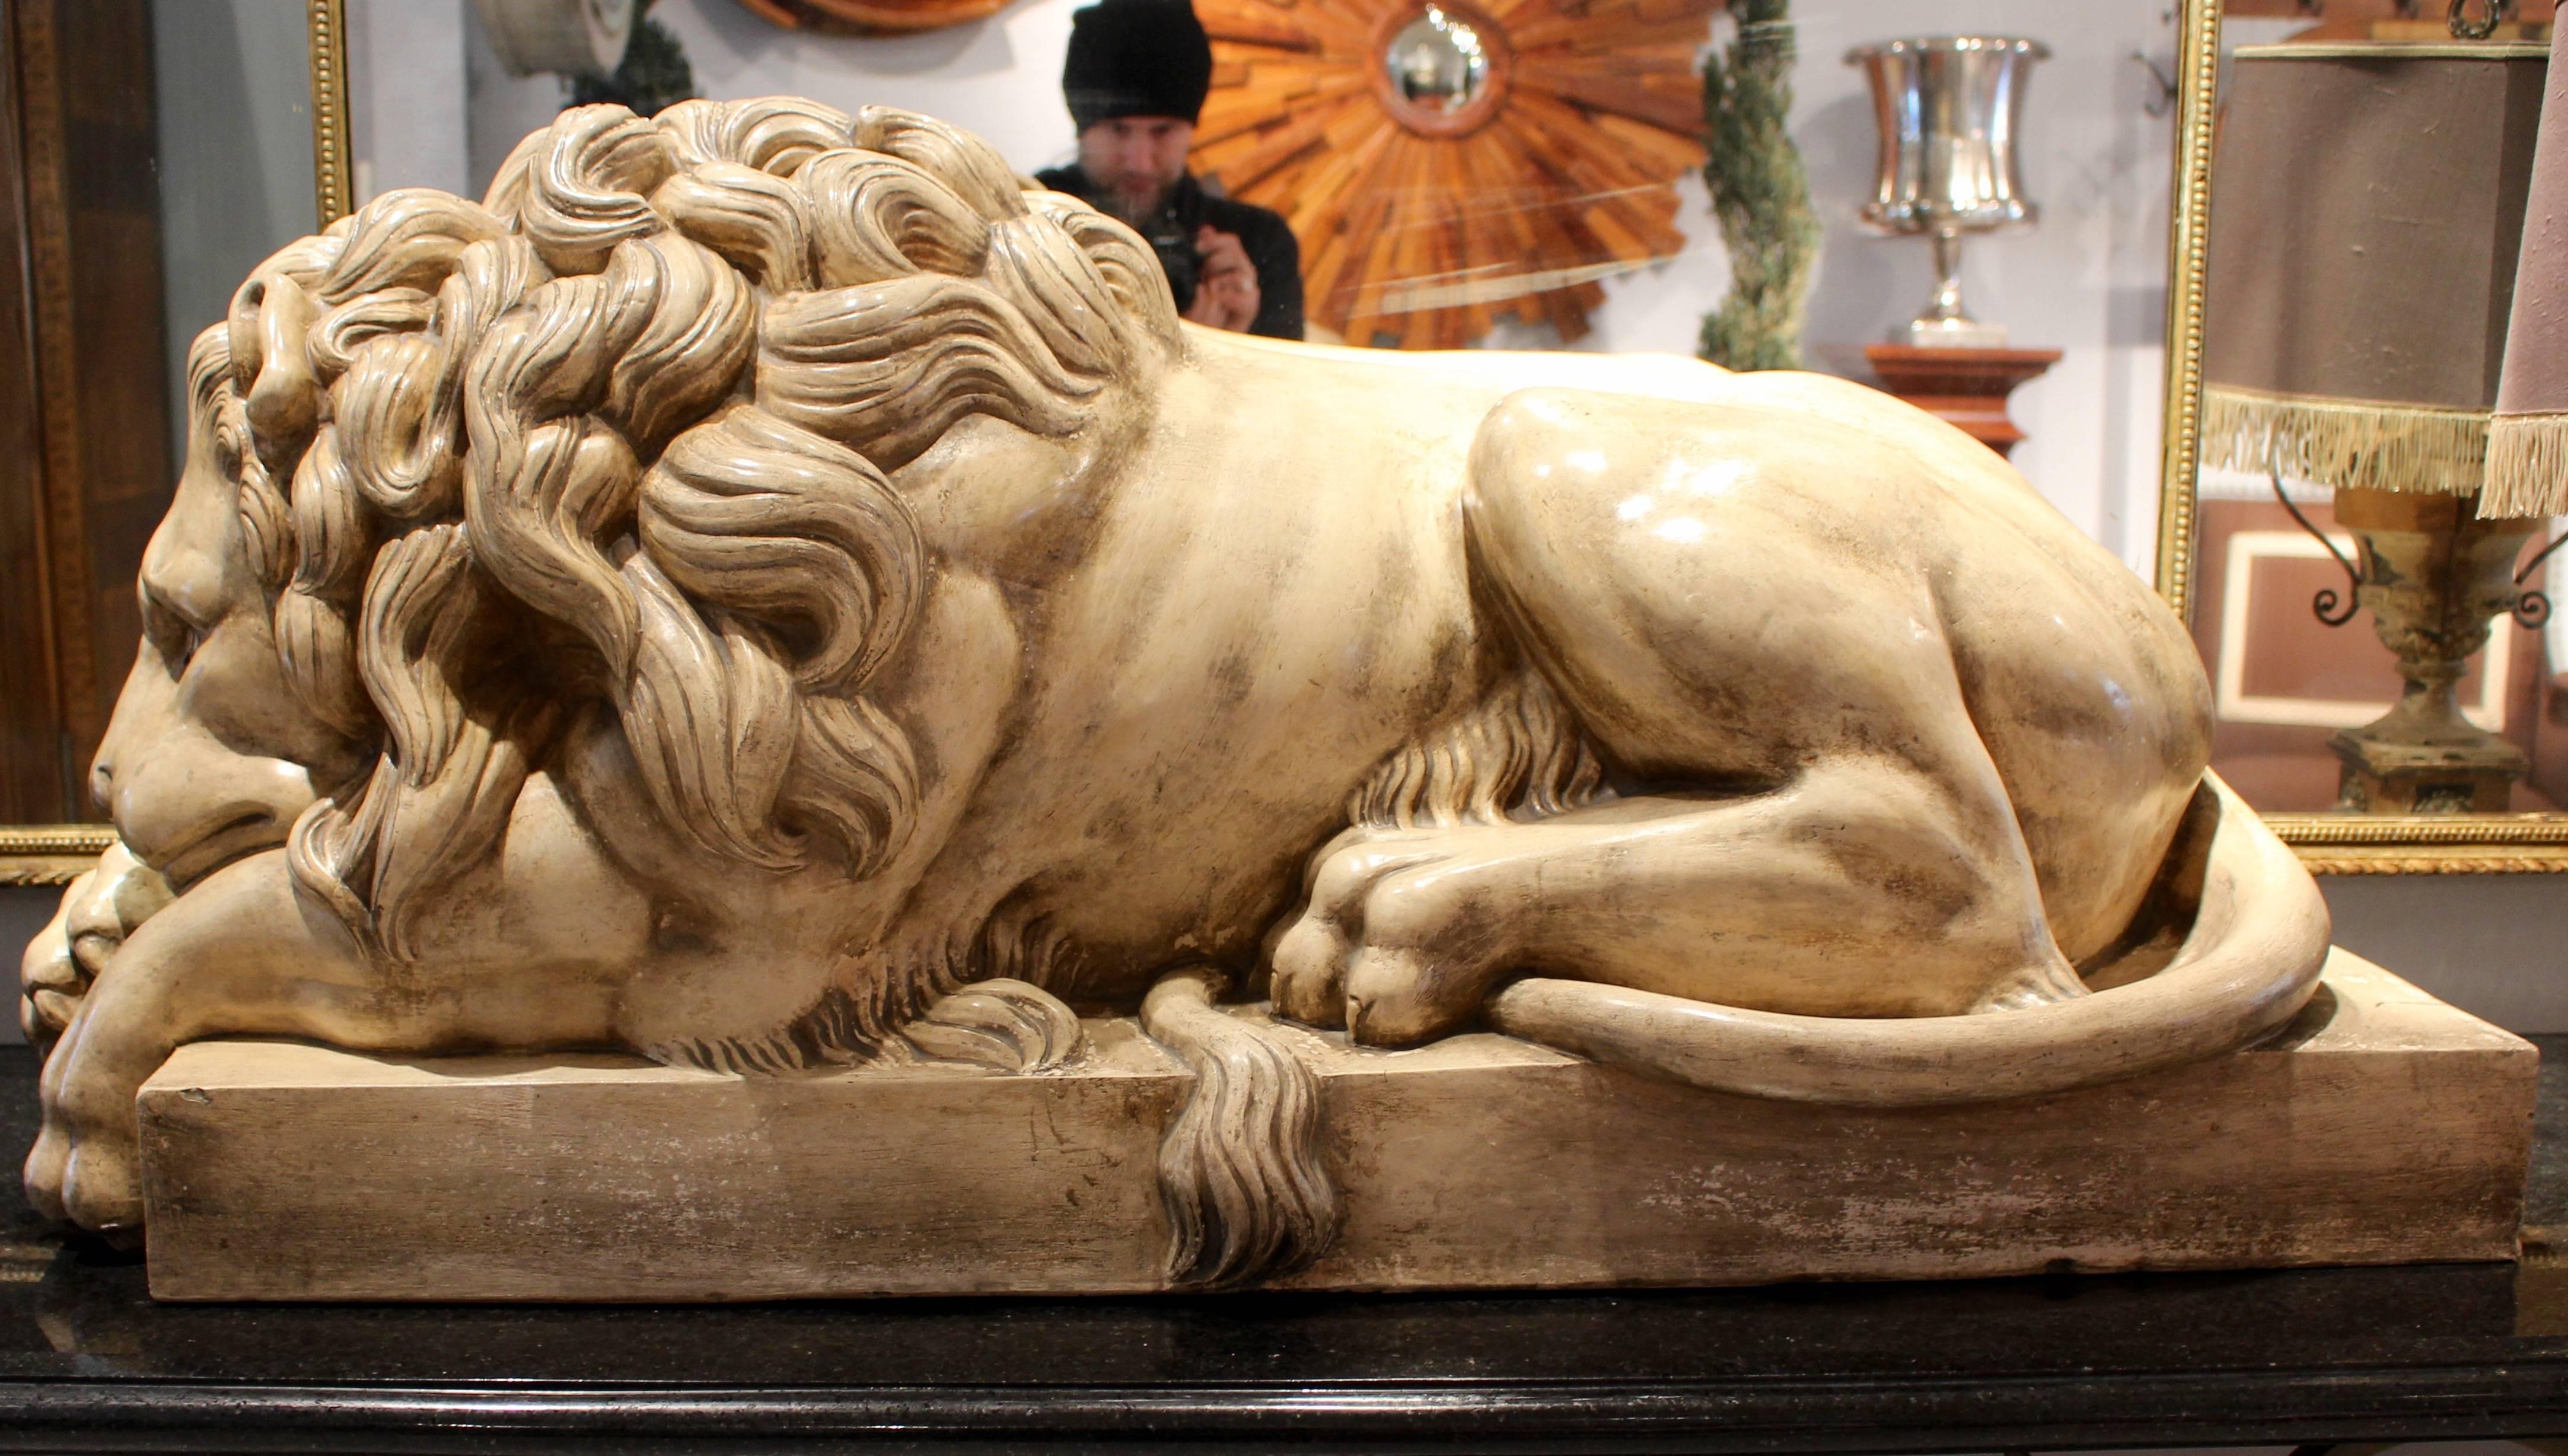 Glazed Pair of Large Italian Mid-20th Century Terracotta Lion Sculptures after Canova